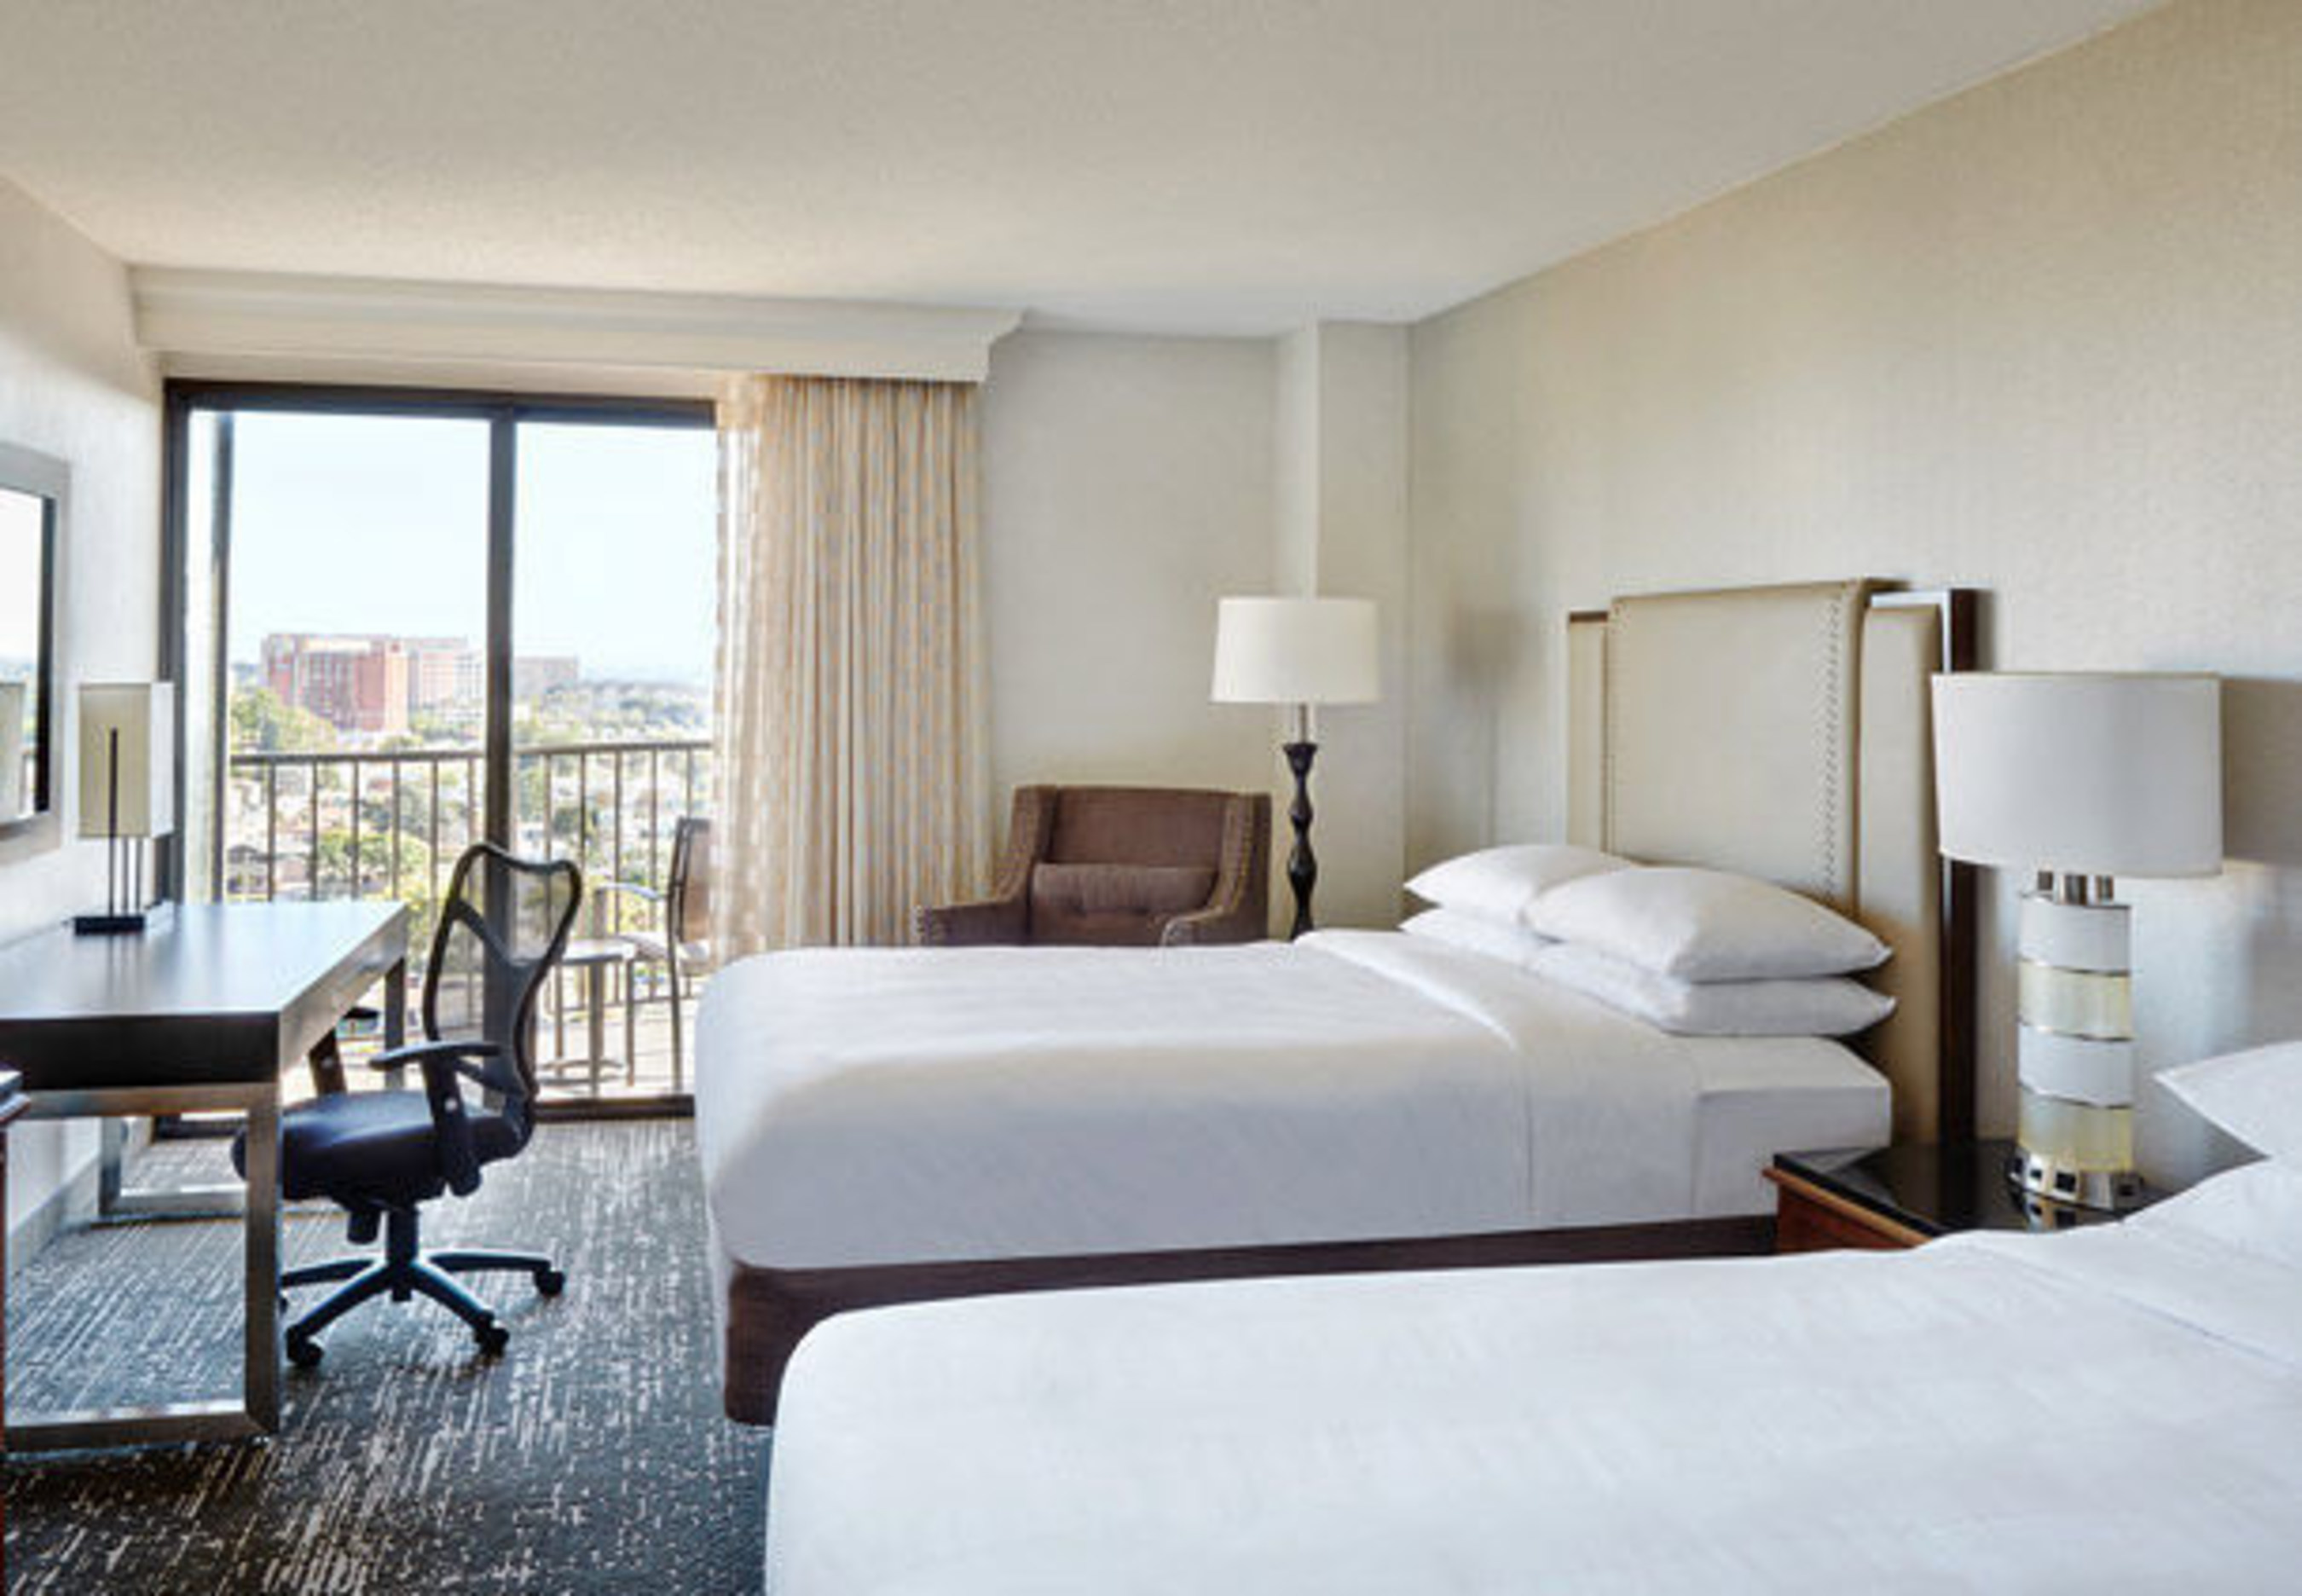 For the third consecutive year, TripAdvisor has recognized Anaheim Marriott as a GreenLeader for its comprehensive implementation of eco-friendly practices. For hotel information, visit www.anaheimmarriott.com or call 1-714-750-8000.